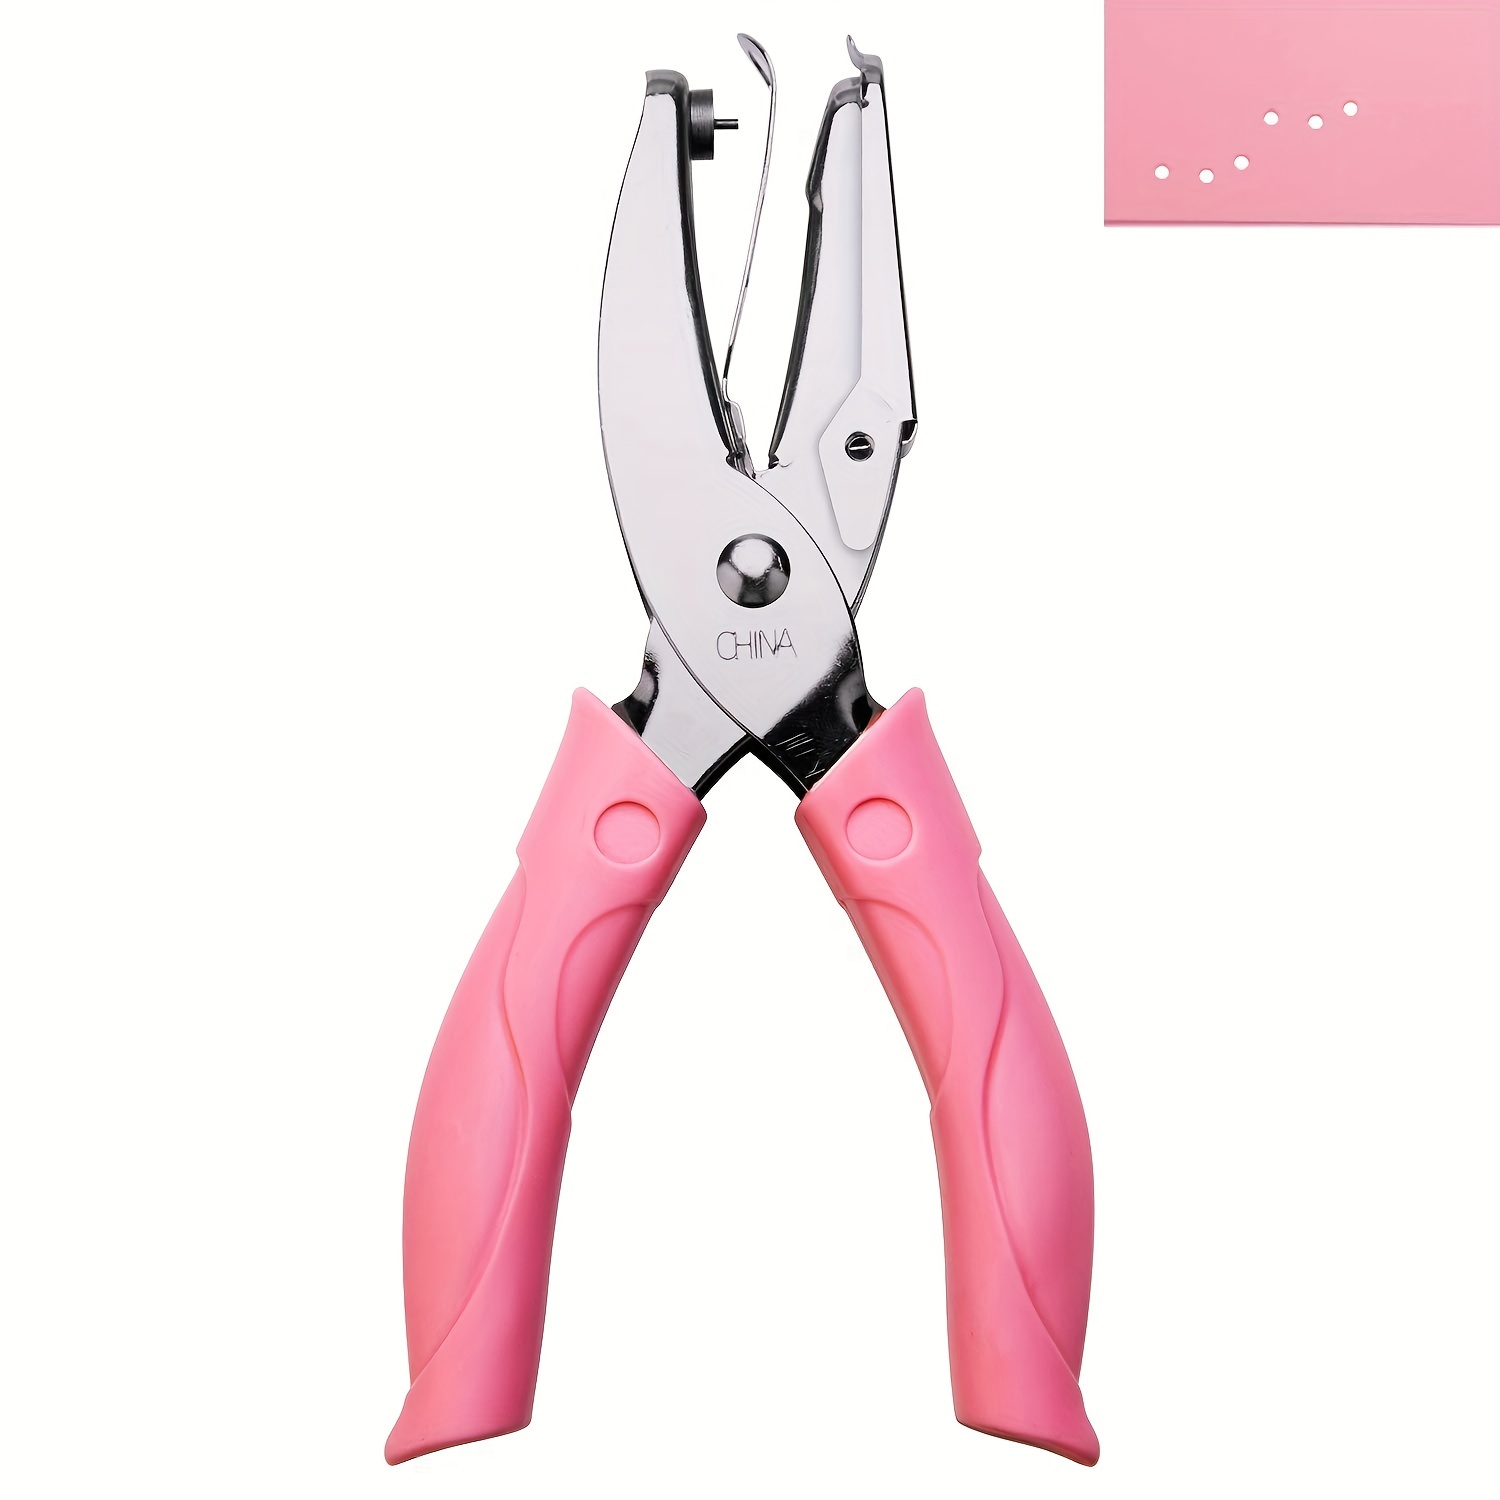 1pc 6mm Round Hole Puncher With Macaron Colored Rubber Grip For Paper  Sheets, Handheld Punch Tool